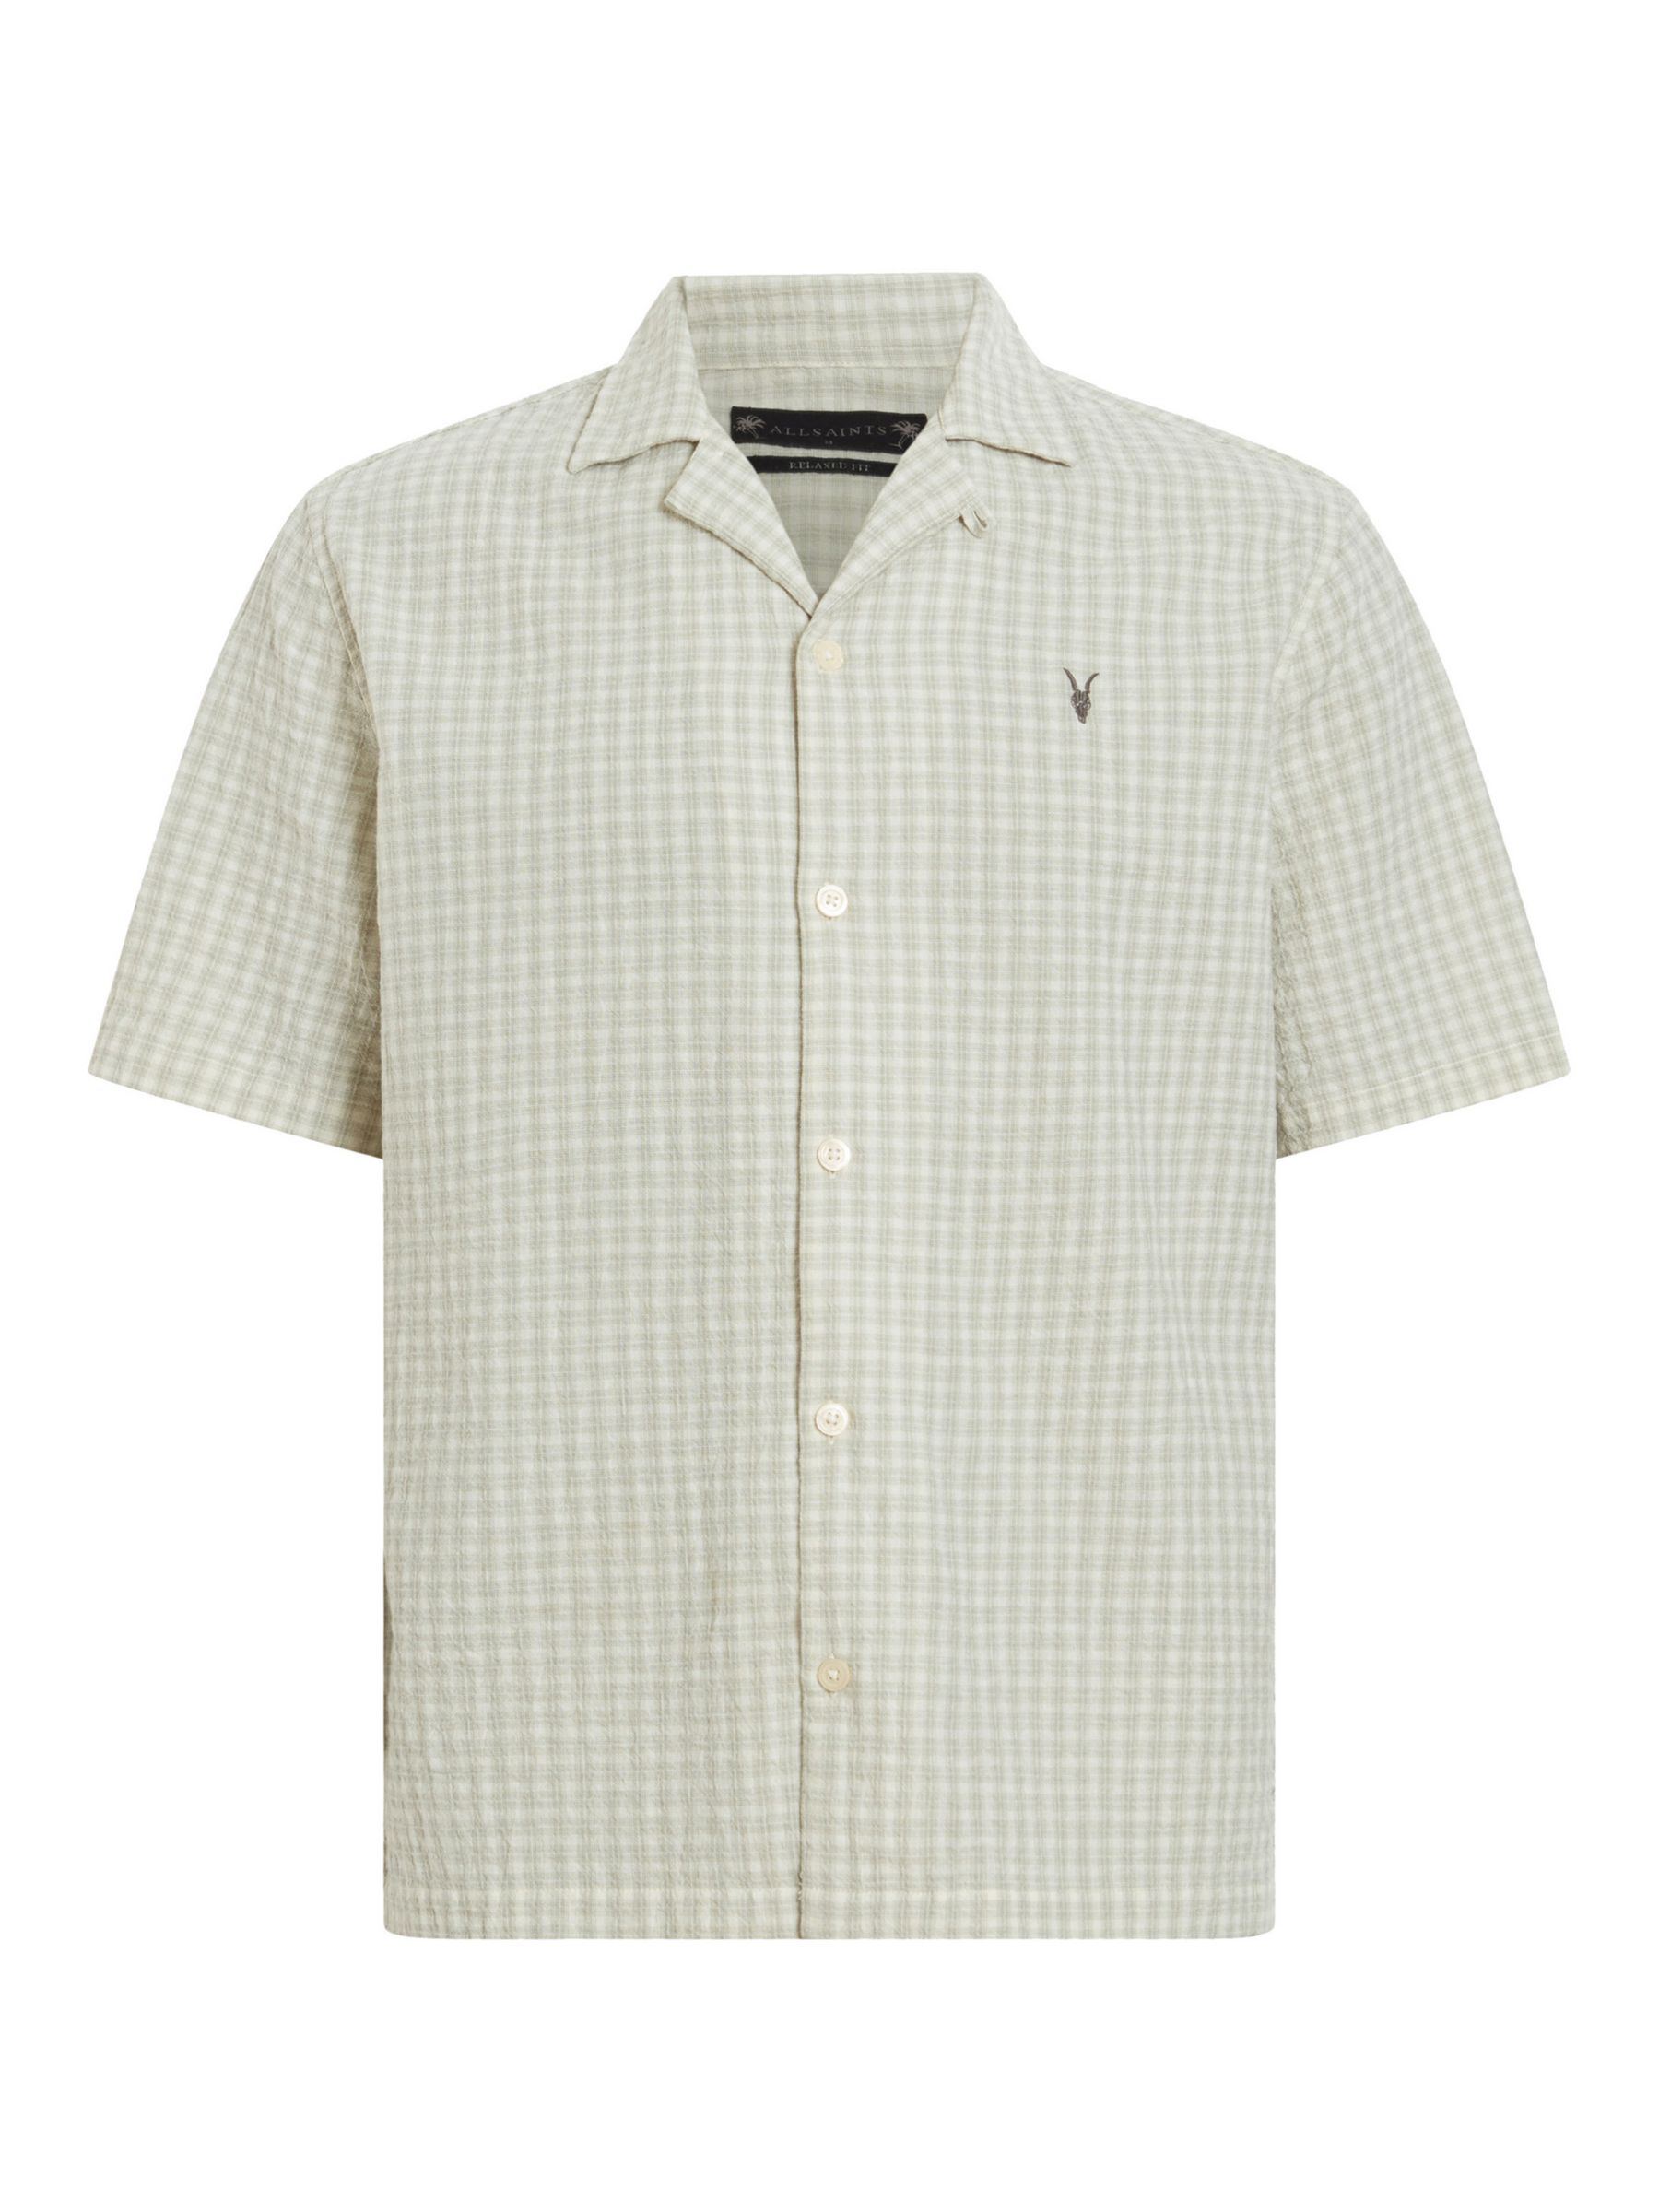 Buy AllSaints Selenite Check Organic Cotton Blend Relaxed Fit Shirt, Milky Grey Online at johnlewis.com